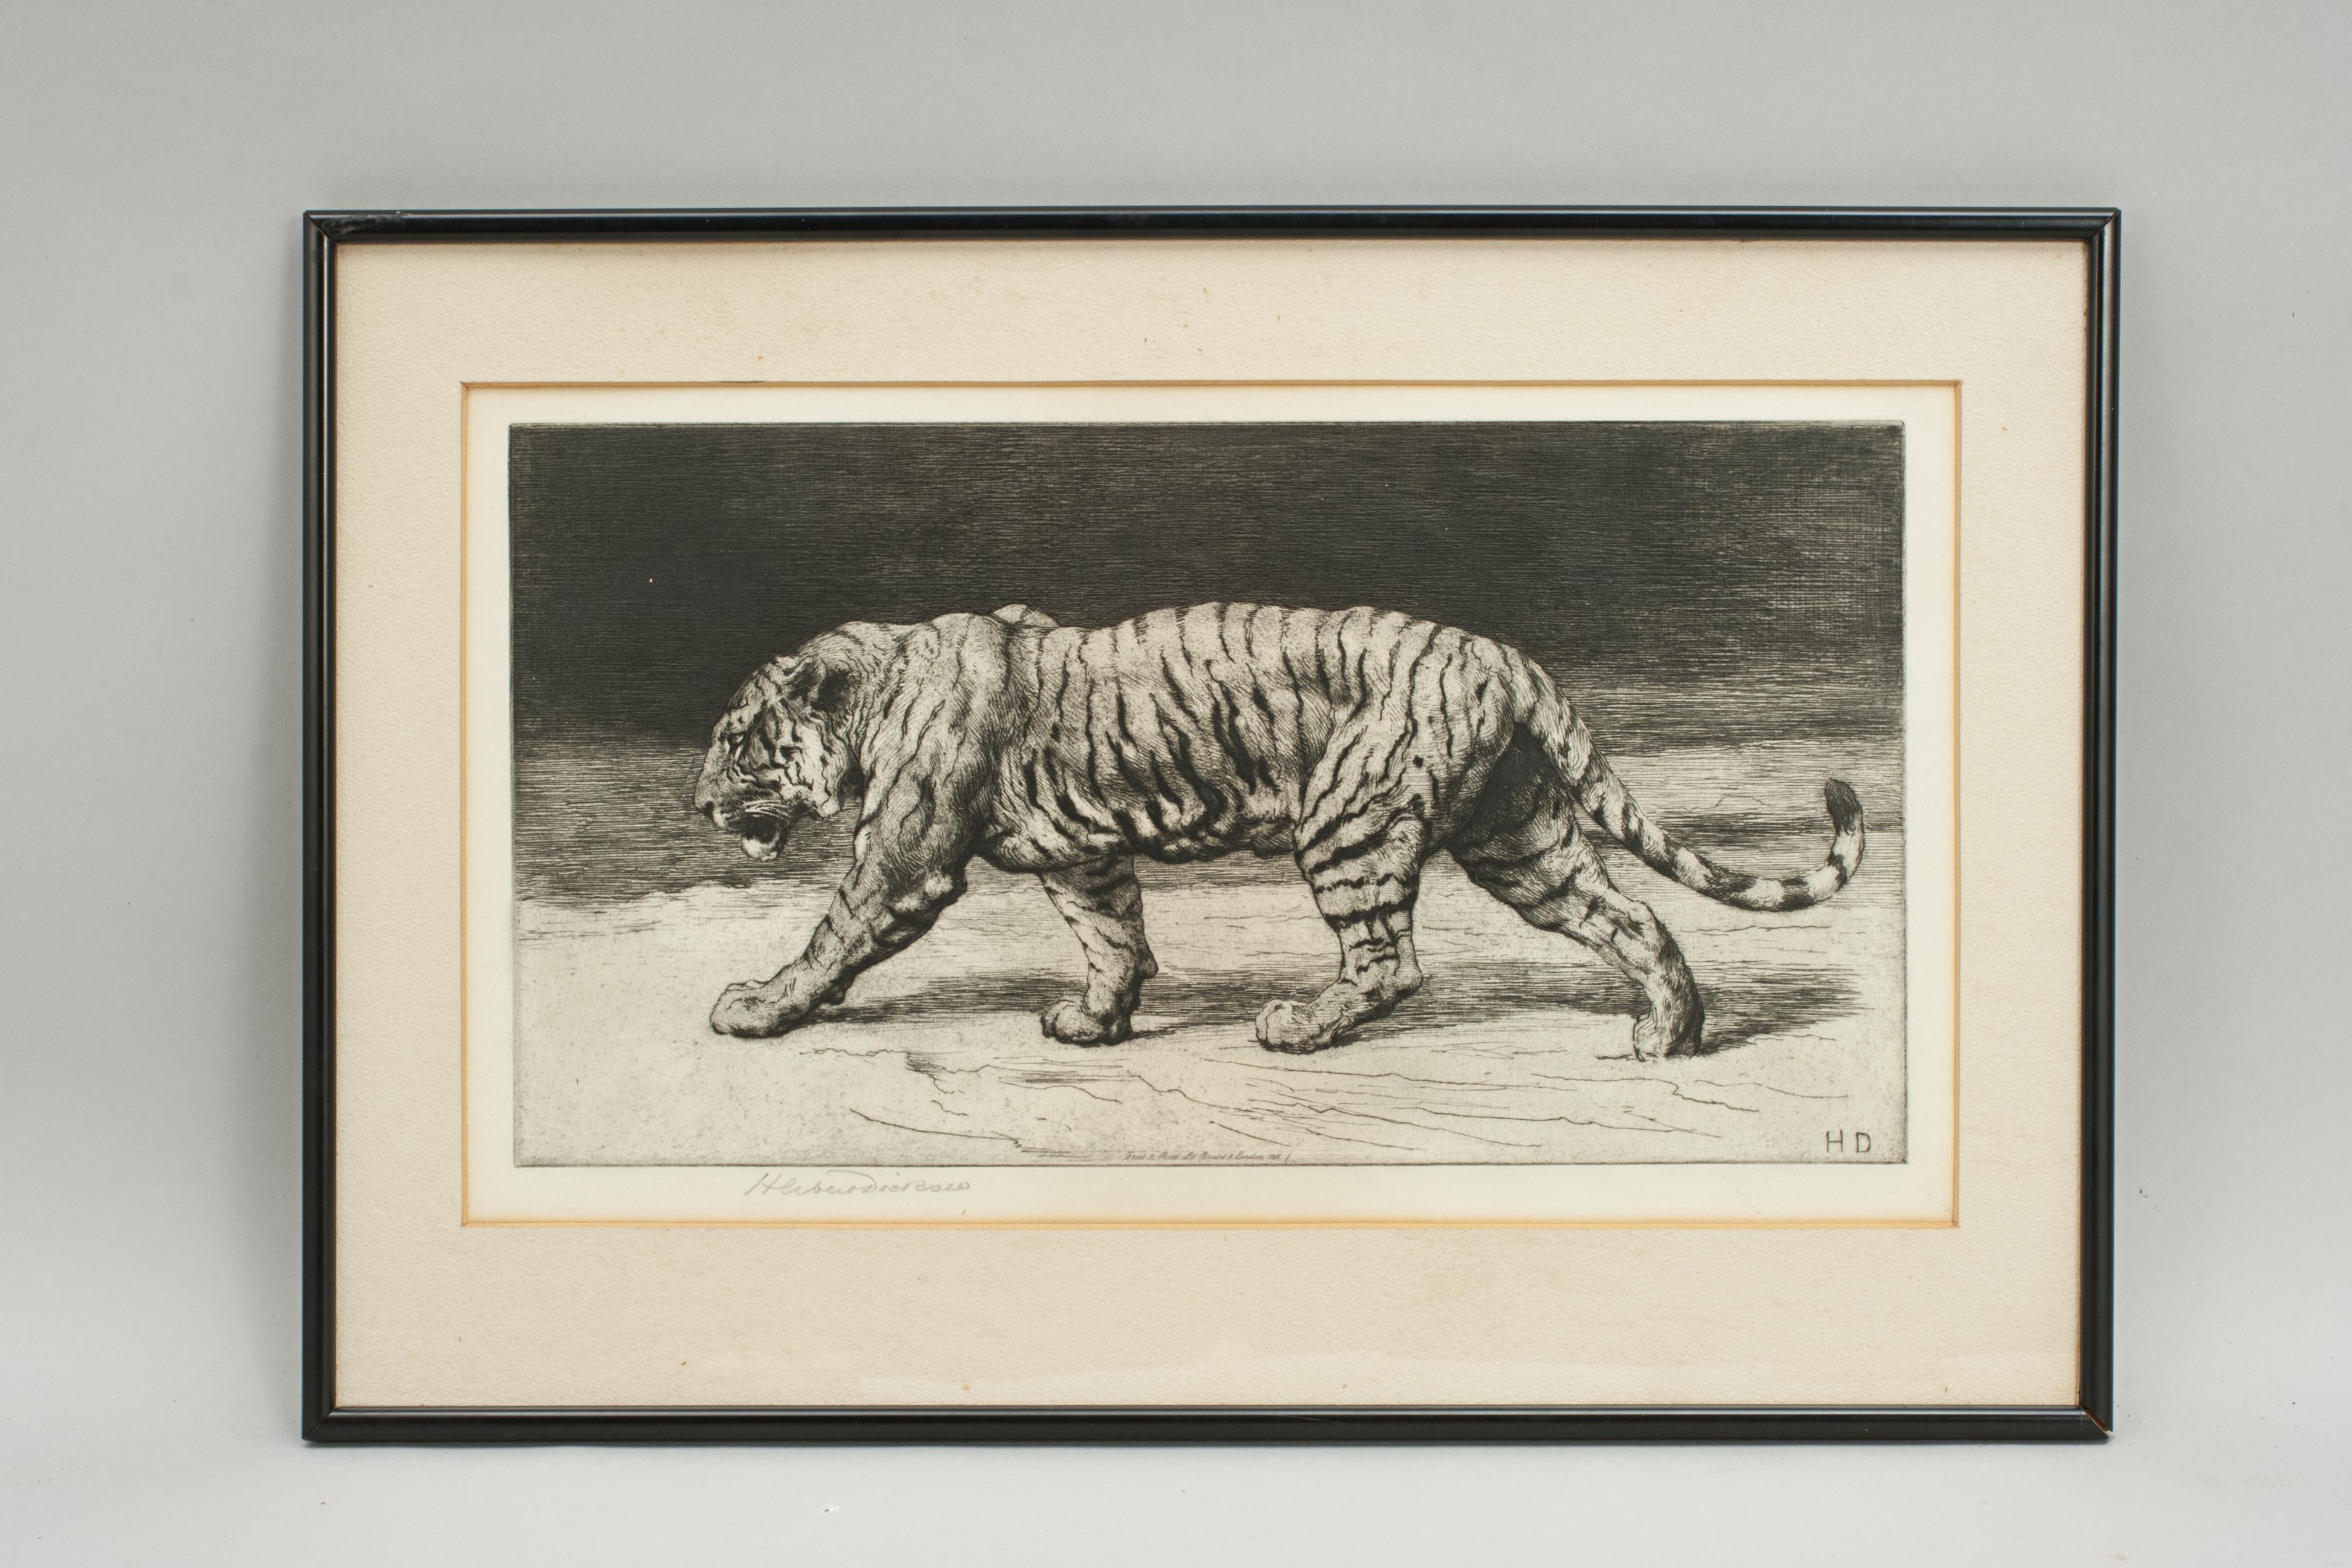 Prowling tiger by Herbert Dicksee.
A framed black and white etching of a prowling tiger by Herbert Dicksee. The powerful wildlife print is on vellum and published in 1915 by Frost & Reed, signed in pencil by the artist.

A great etching, print by